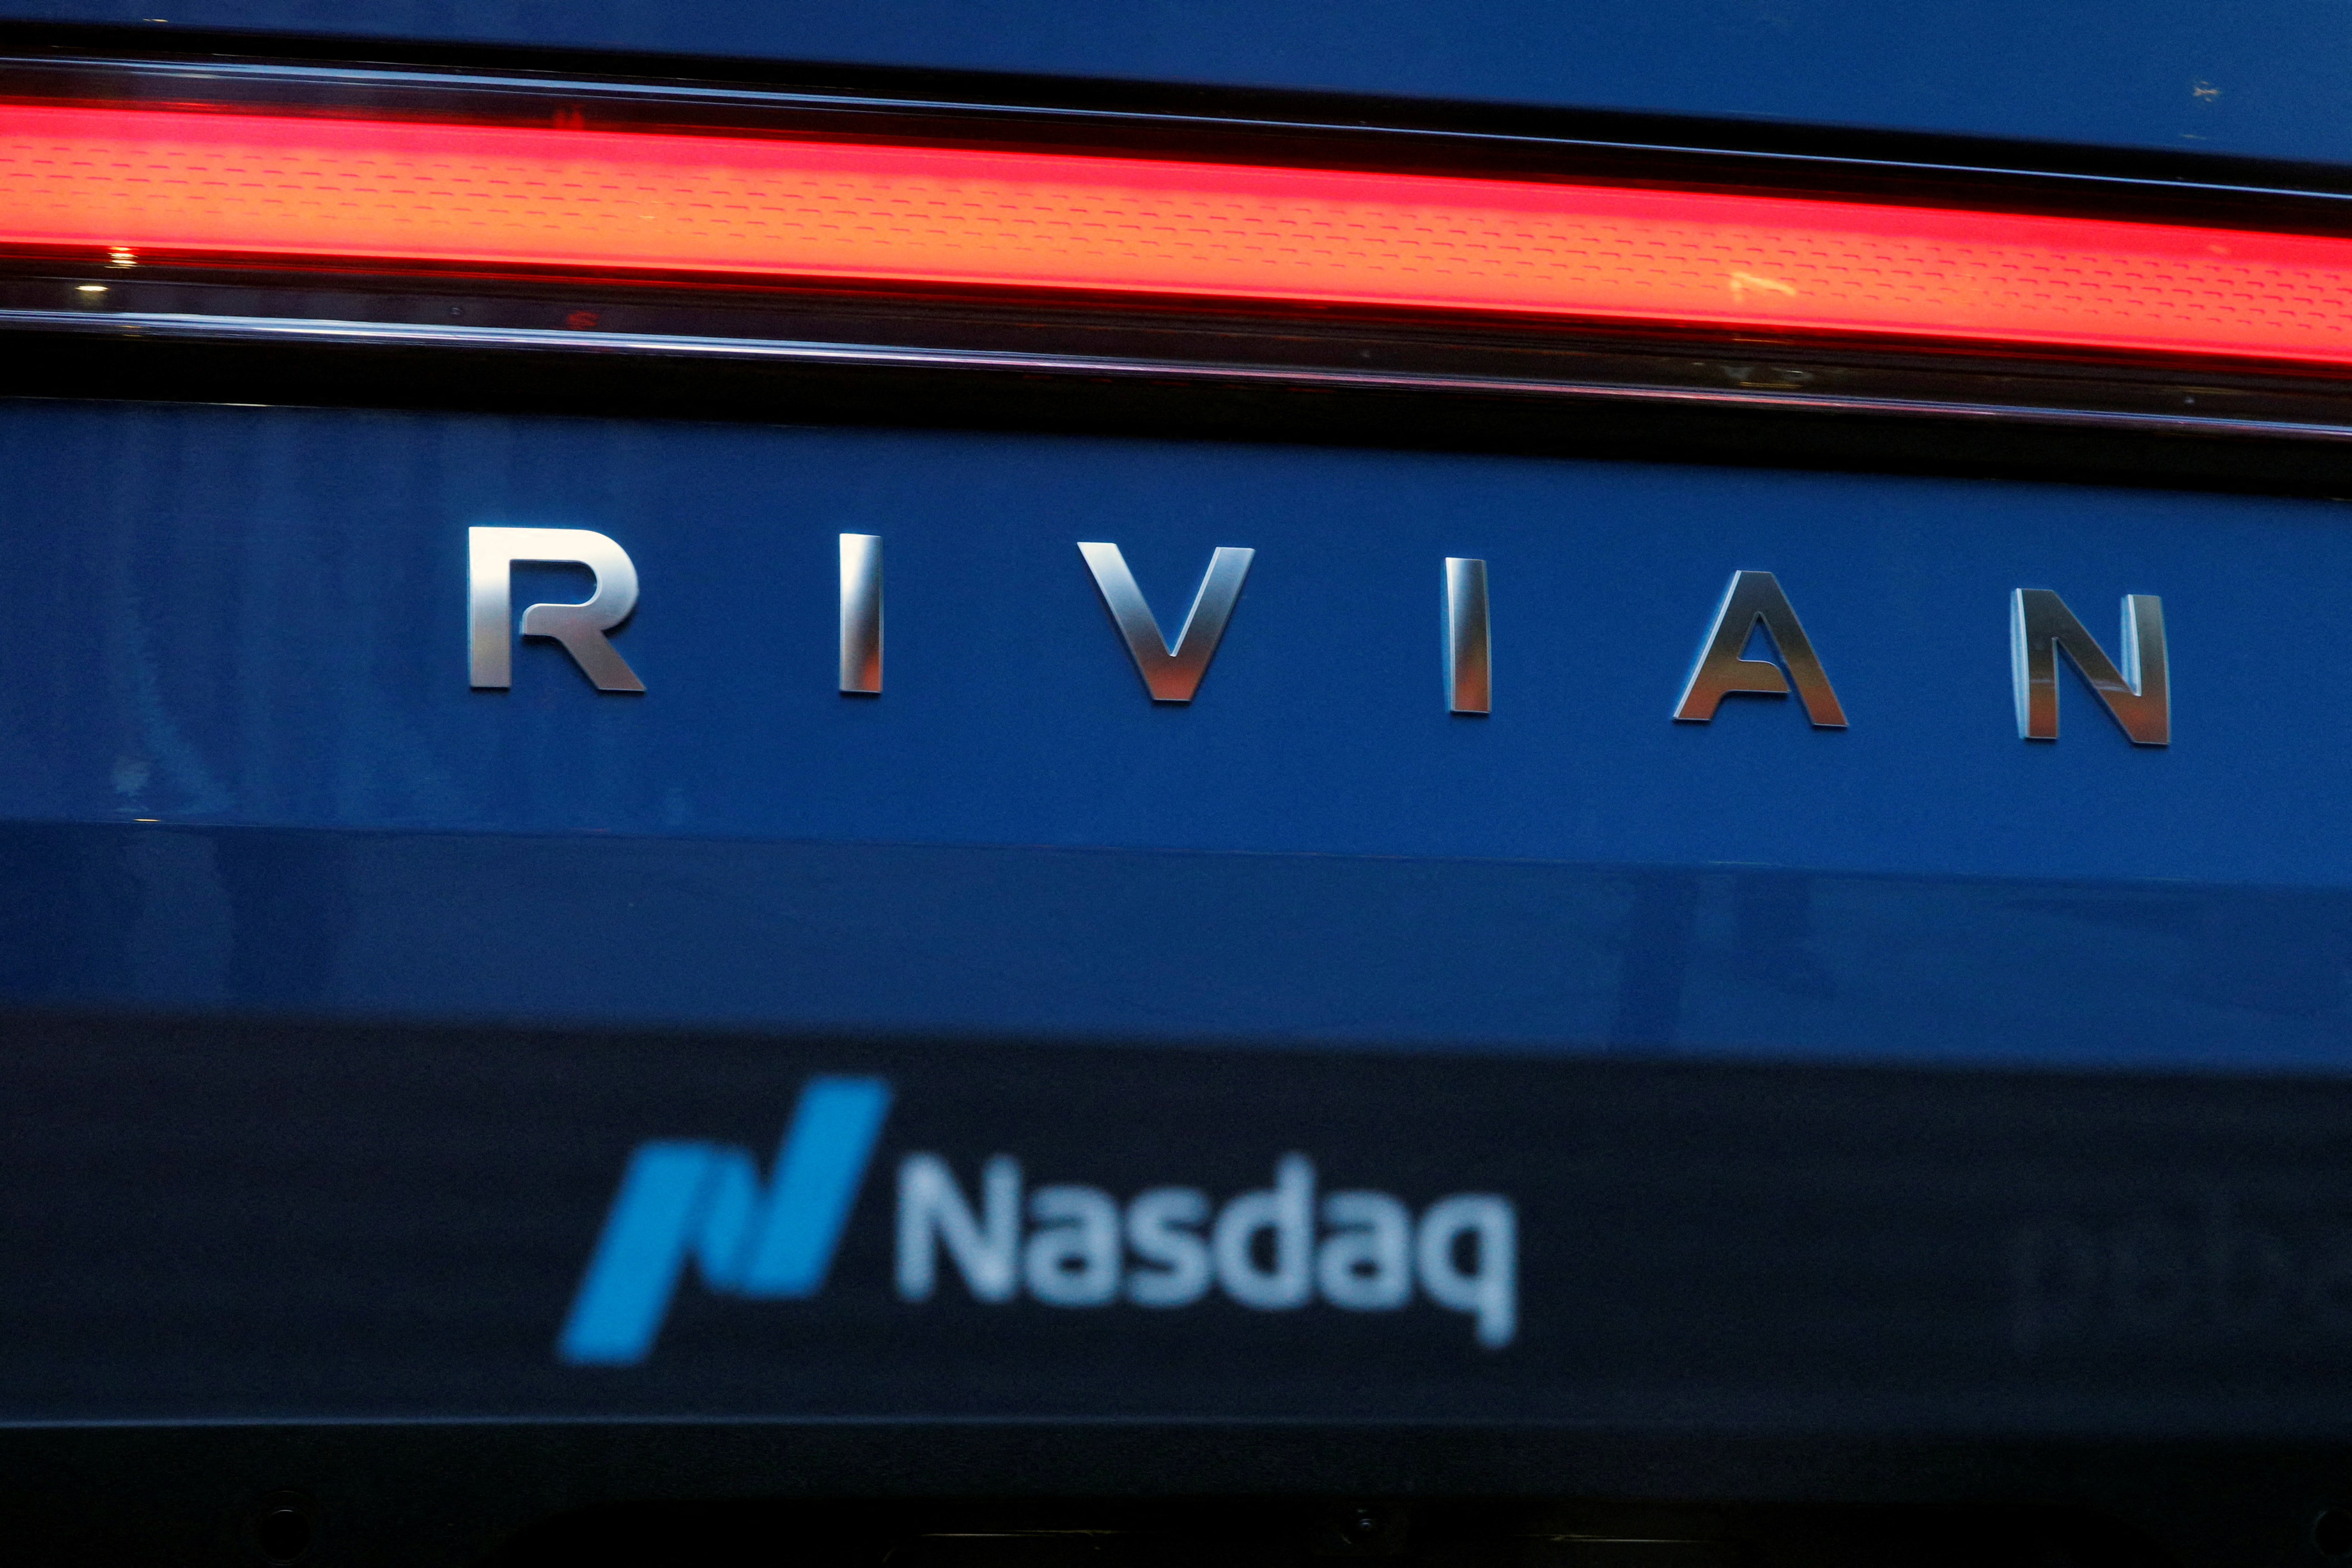 A Rivian R1T pickup, the Amazon-backed electric vehicle (EV) maker, is parked outside the Nasdaq Market site in Times Square in New York